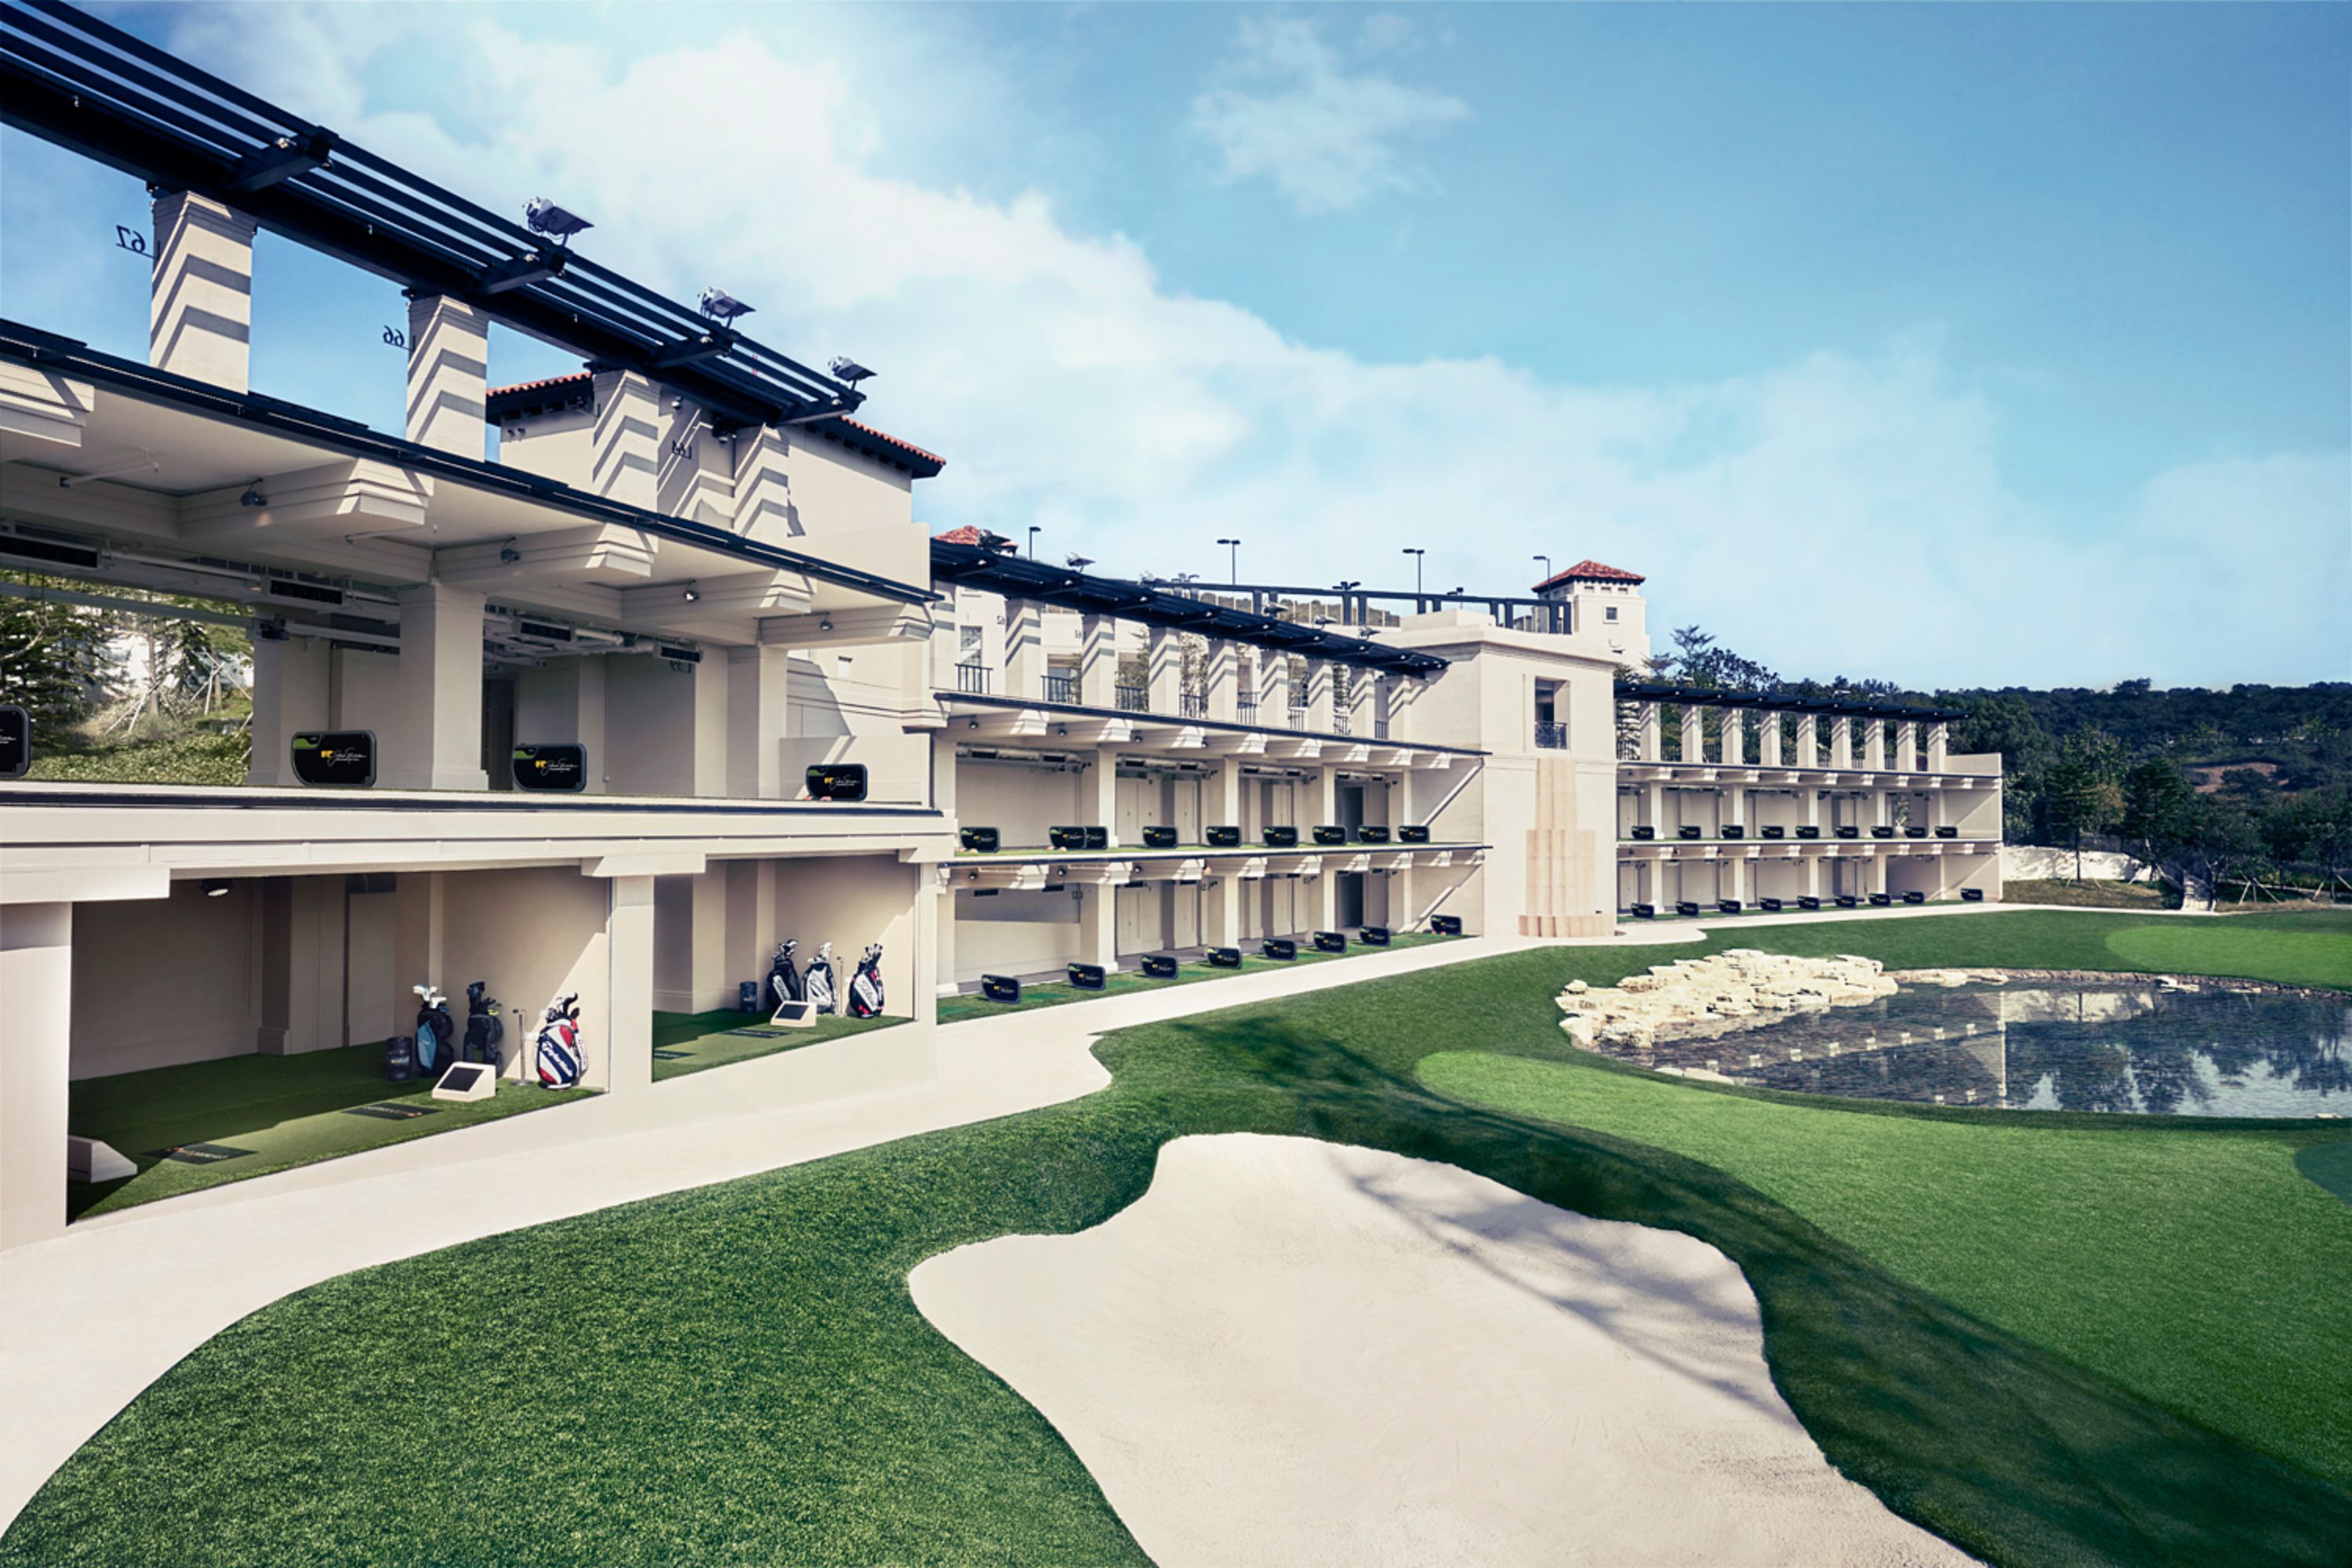 Improve your swing at the new Hong Kong Golf and Tennis Academy